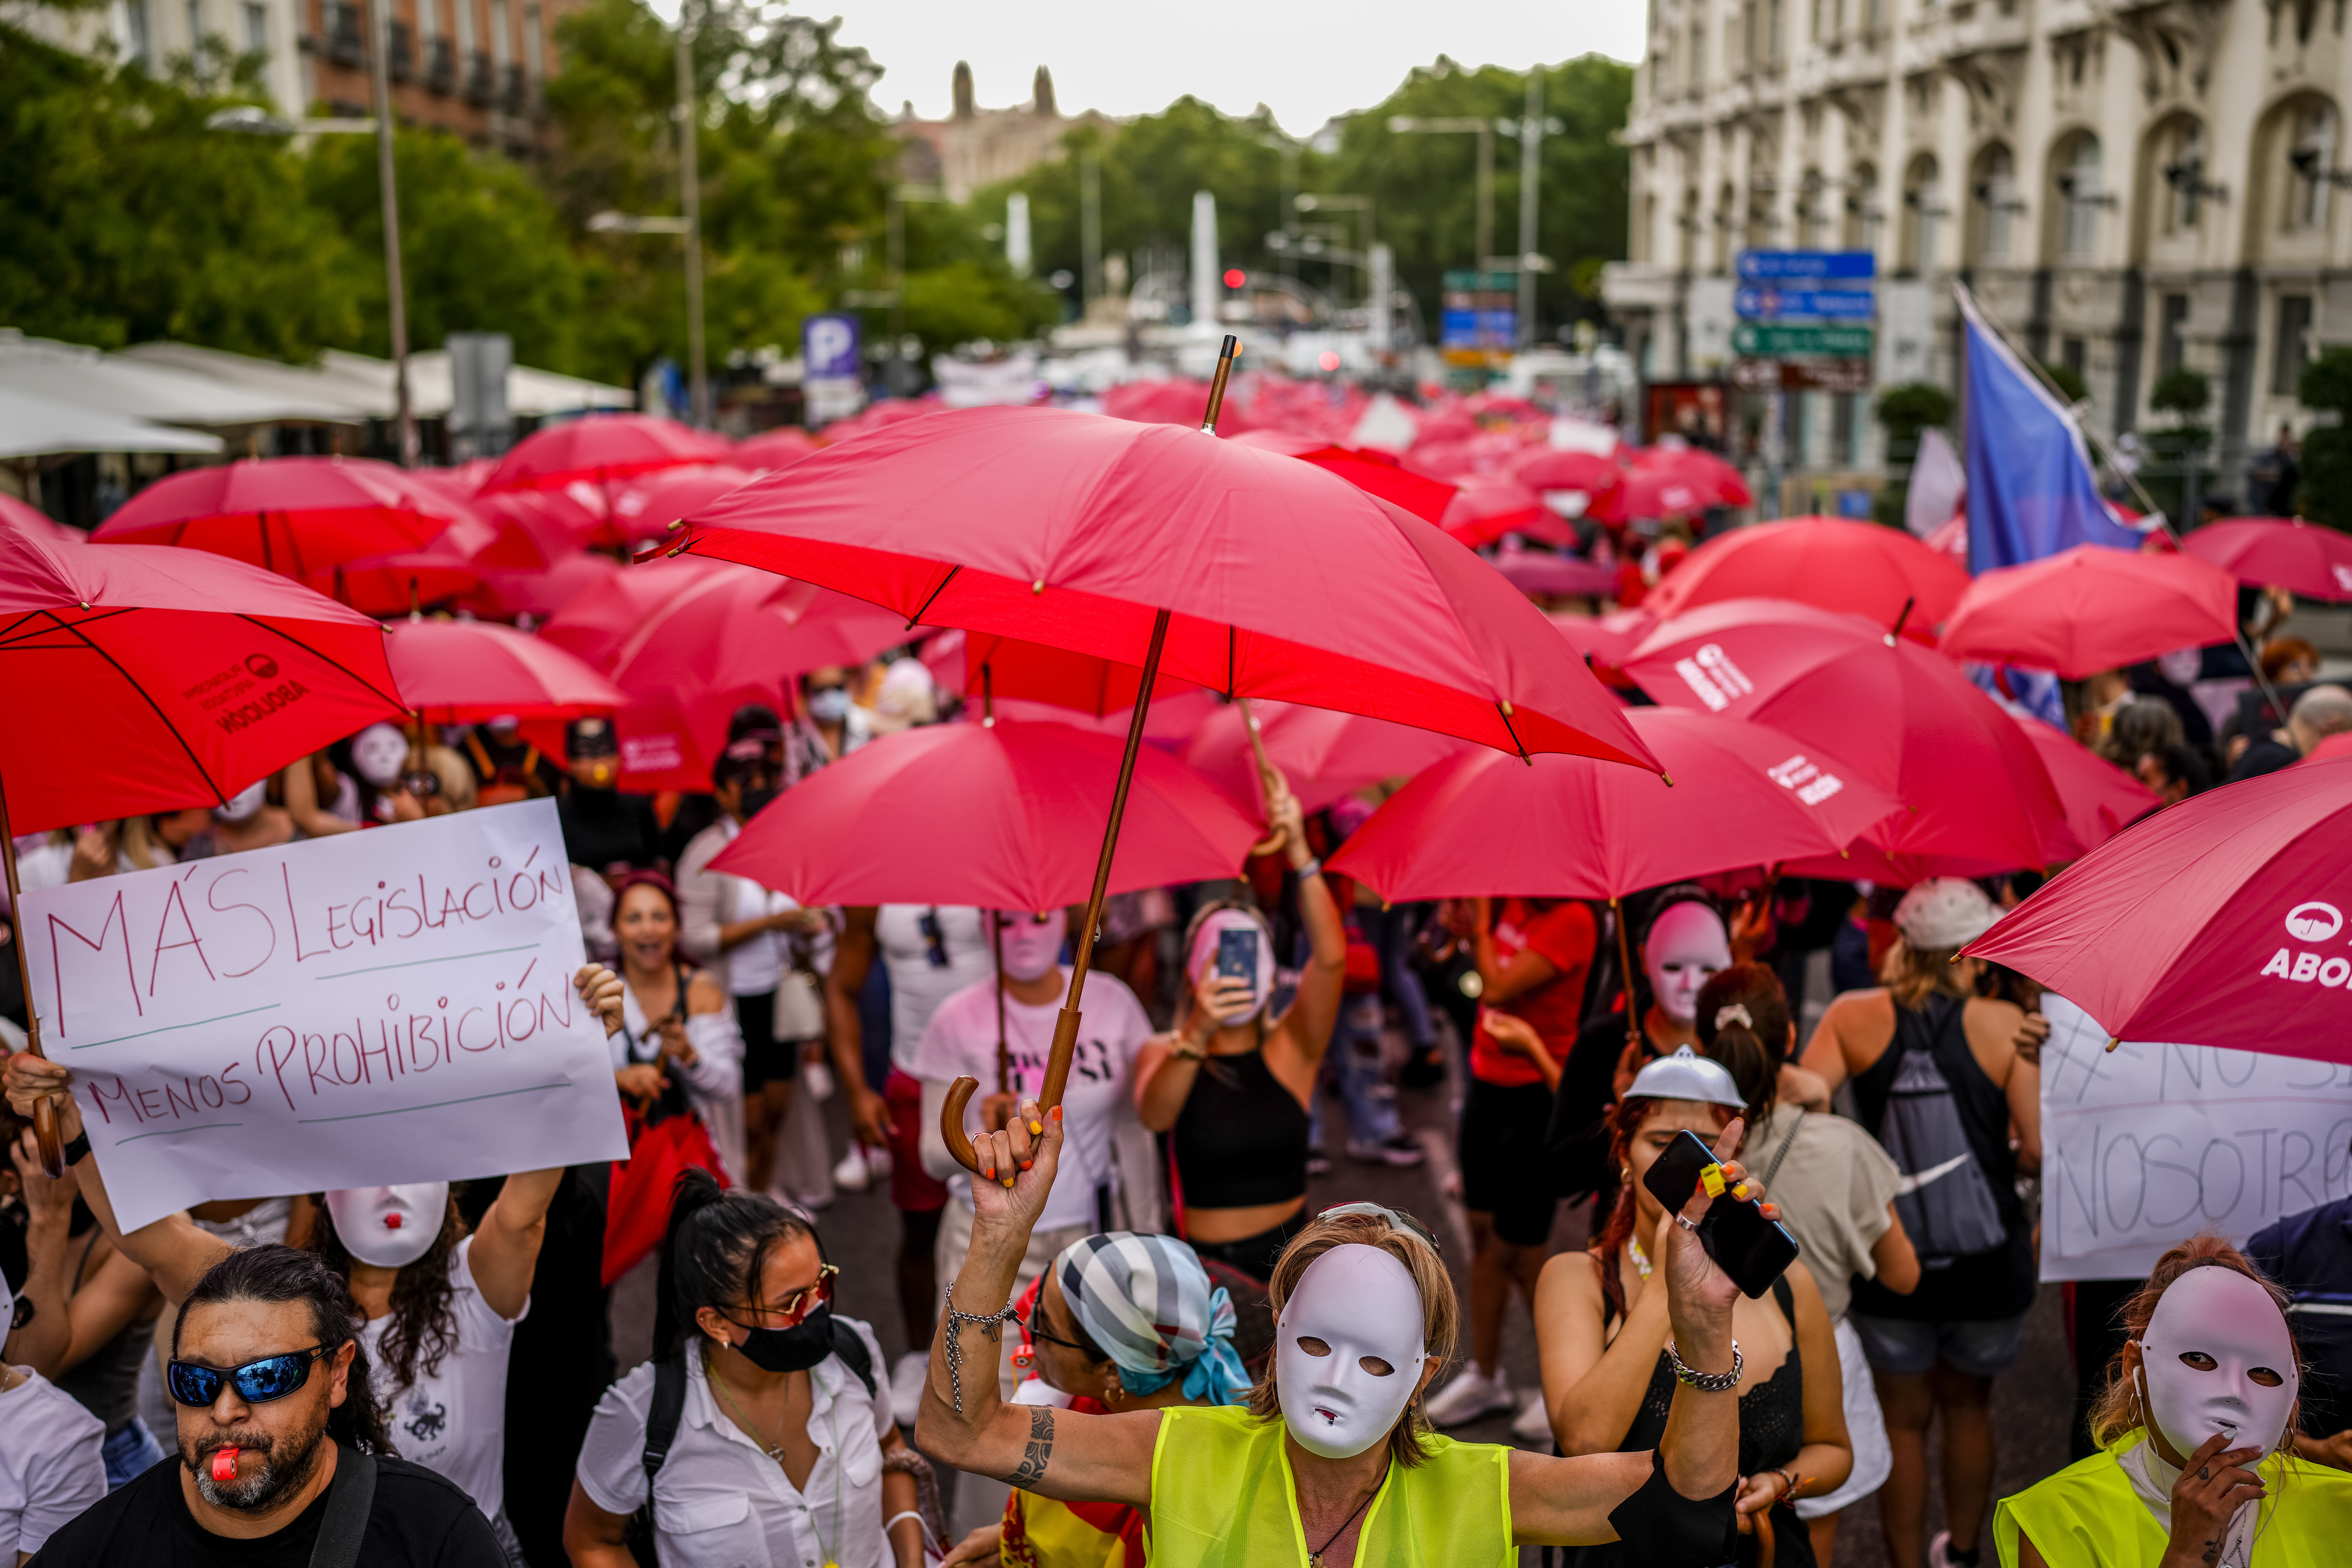 Spanish sex club owners, workers protest prostitution bill